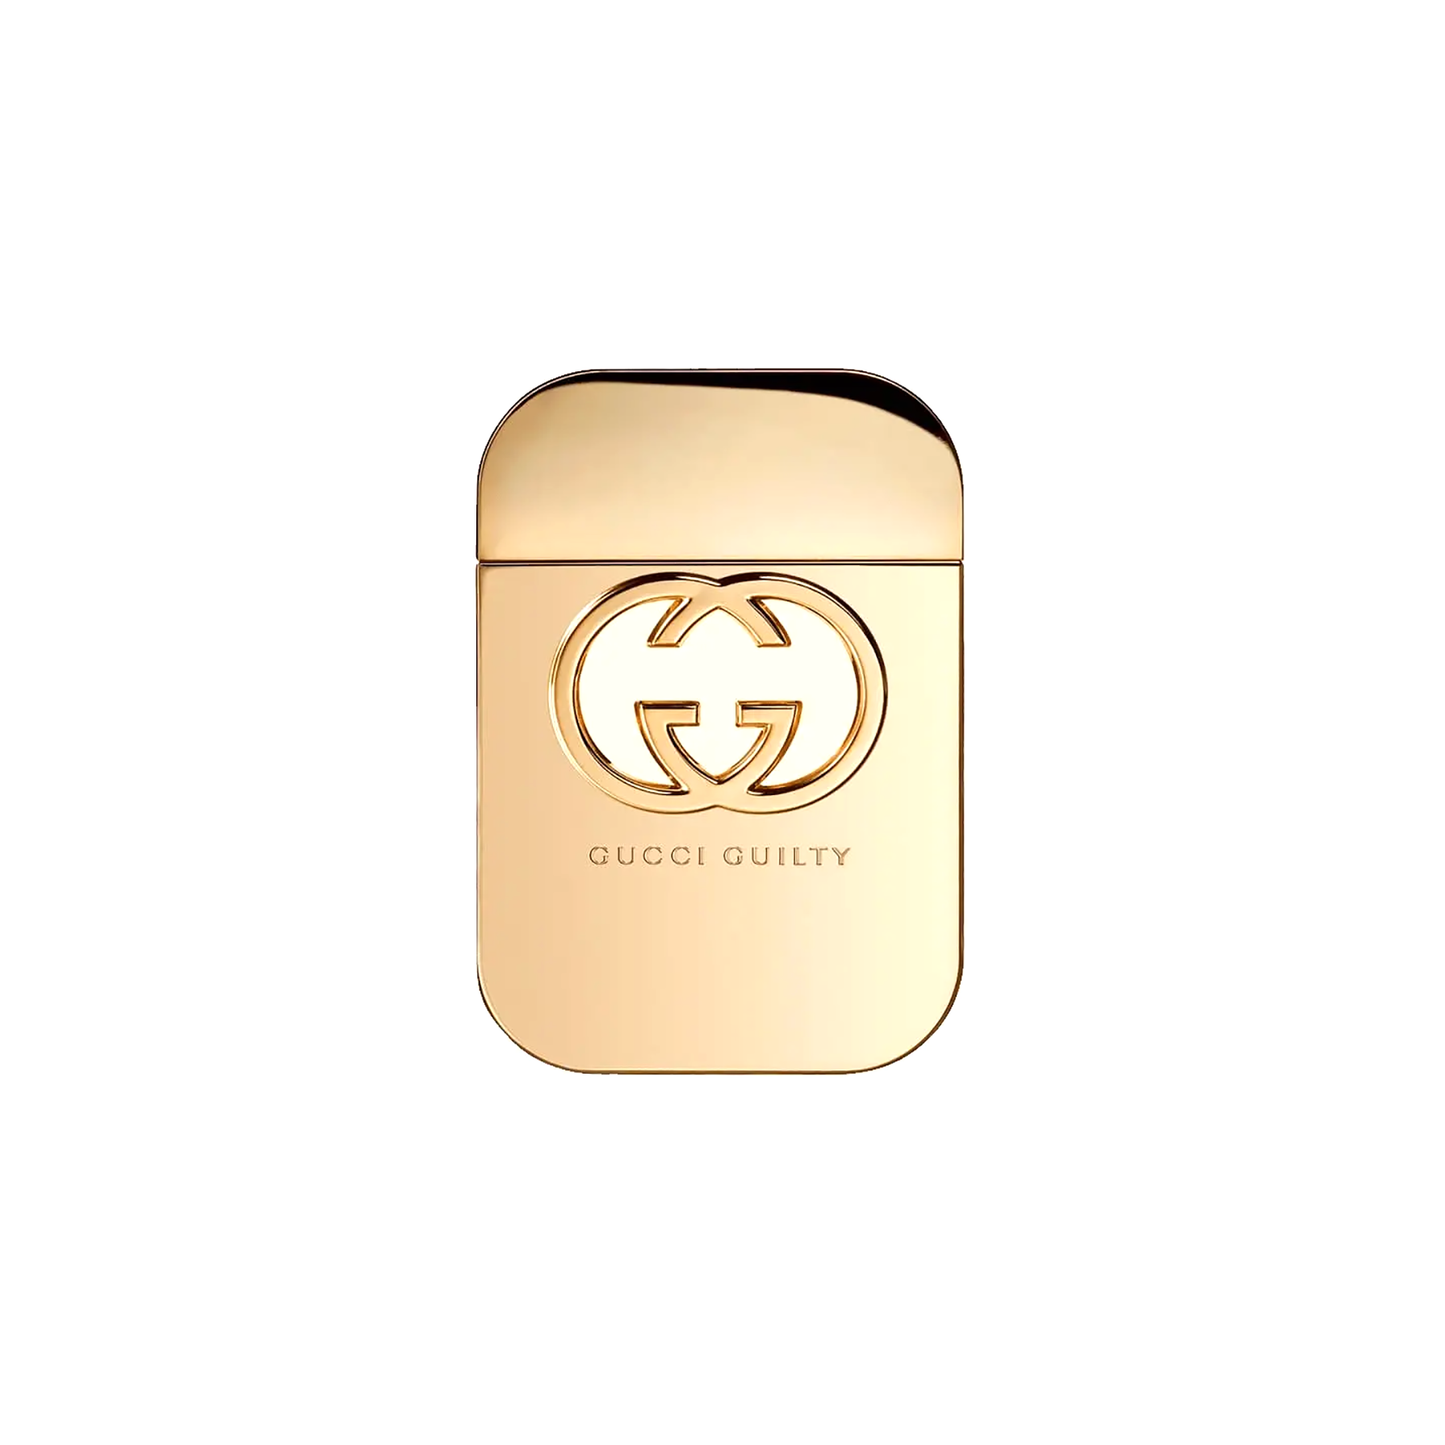 Gucci - Guilty - Edt - 75ml